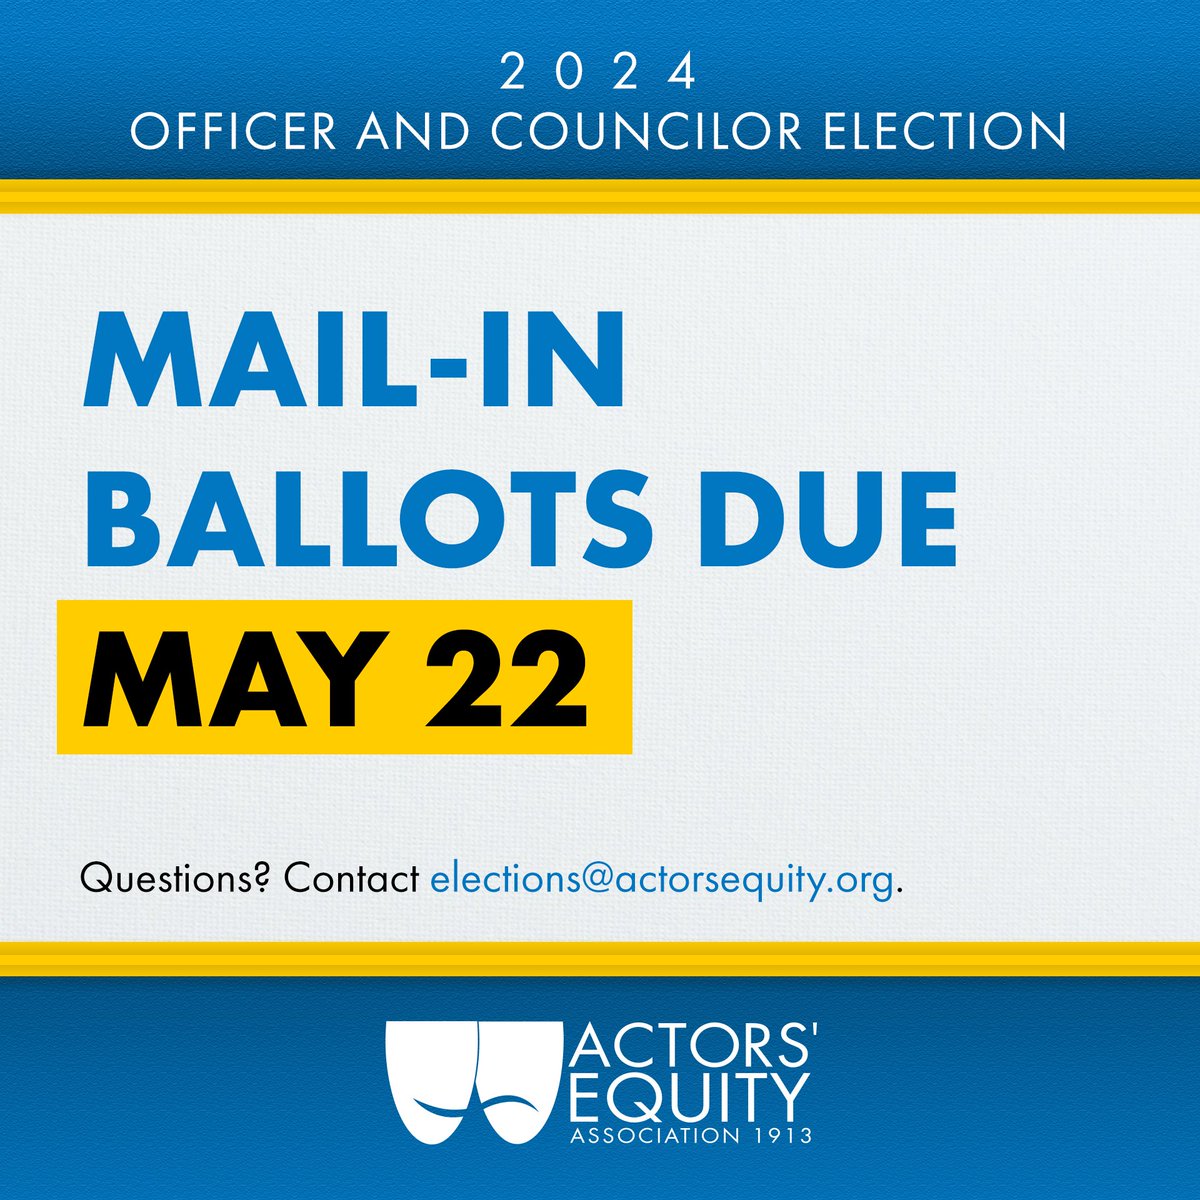 Have you cast your vote in our National Council election yet? Ballots must be received by Wednesday, May 22, 2024 at 5 p.m. ET/4 p.m. CT/3 p.m. MT/2 p.m. PT to be counted. Need to know more about the election or the candidates? Visit the Member Portal: members.actorsequity.org/get-involved/u…